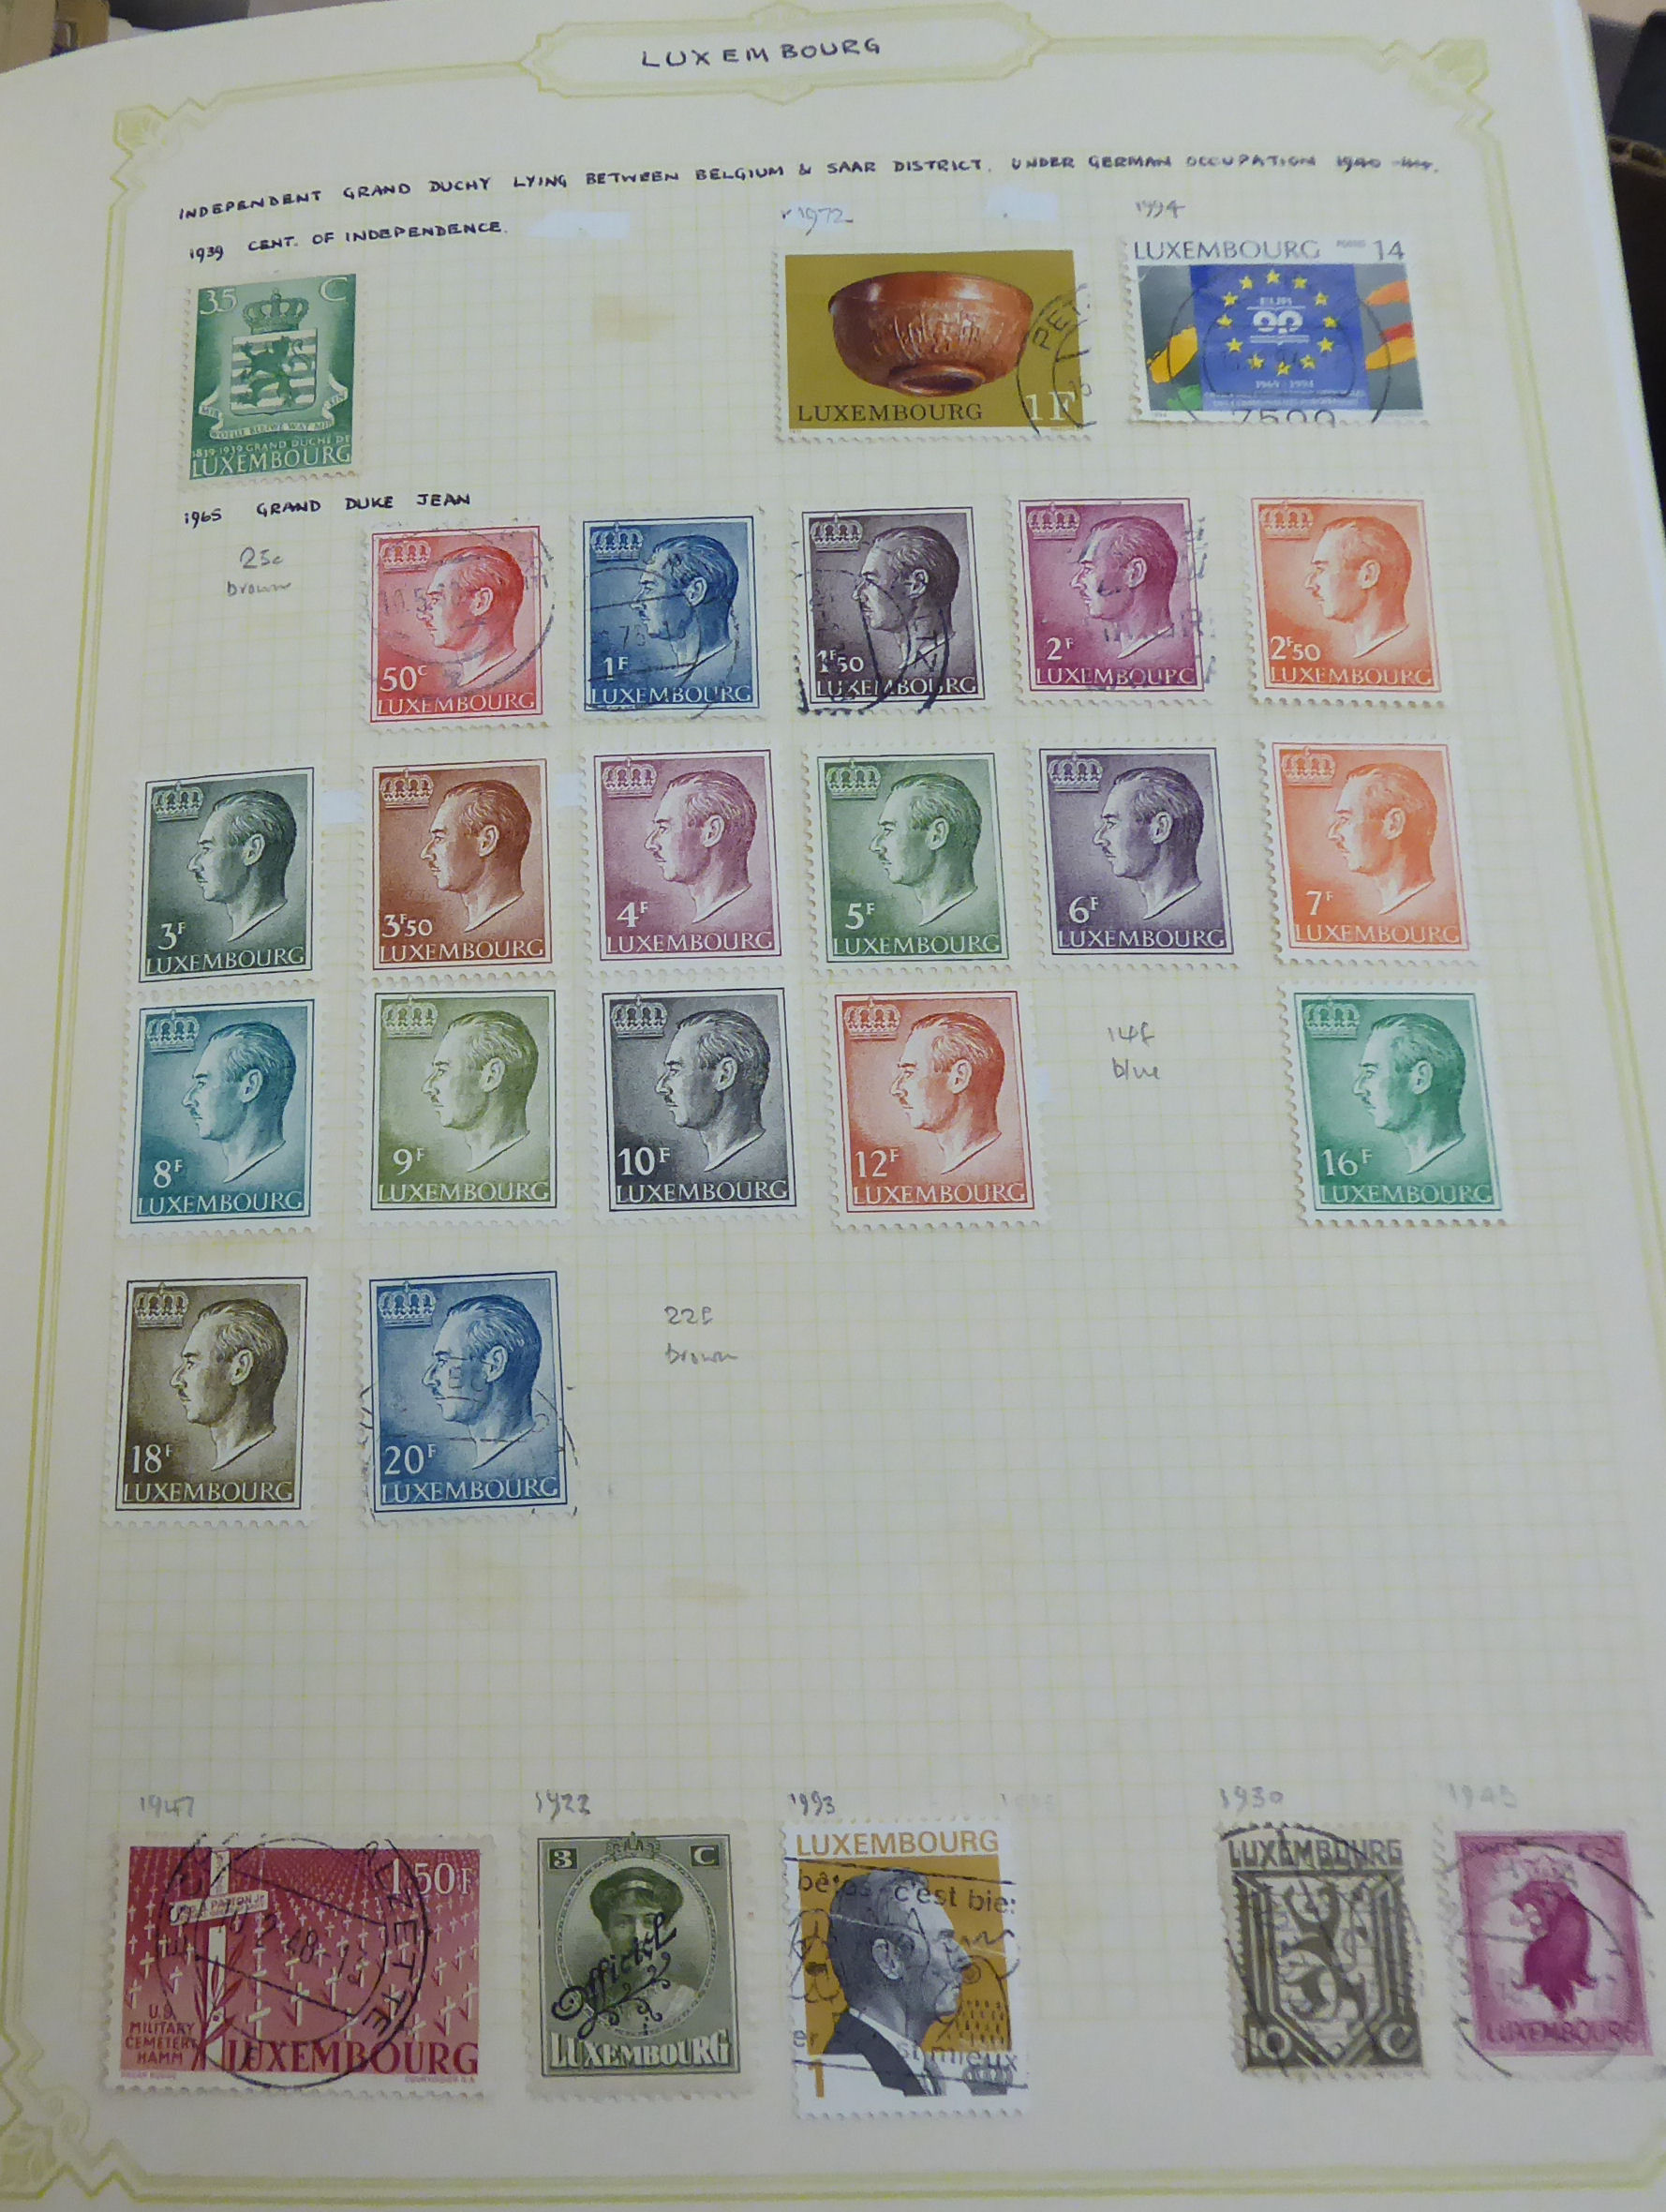 Uncollated used postage stamps, countries beginning with I, K, L, - Image 6 of 6